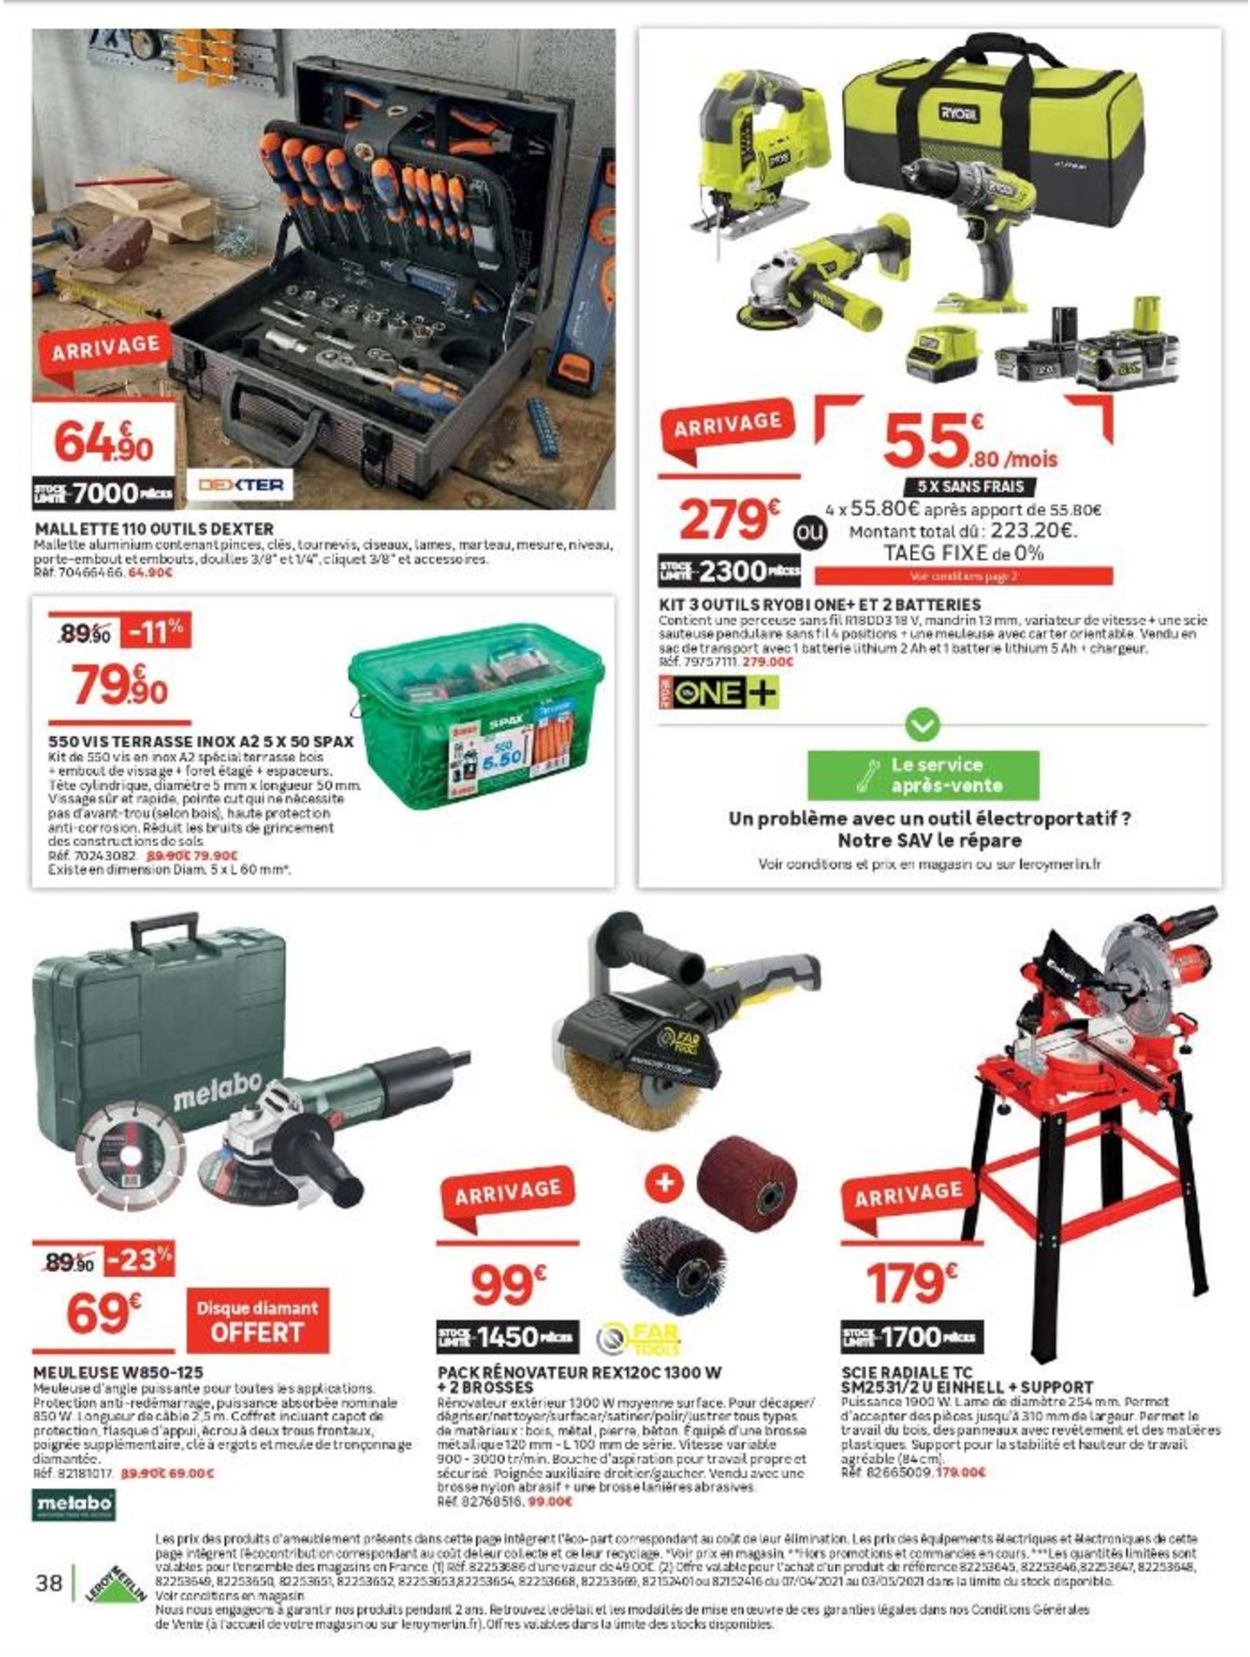 Leroy Merlin Catalogue - 07.04-03.05.2021 (Page 38)